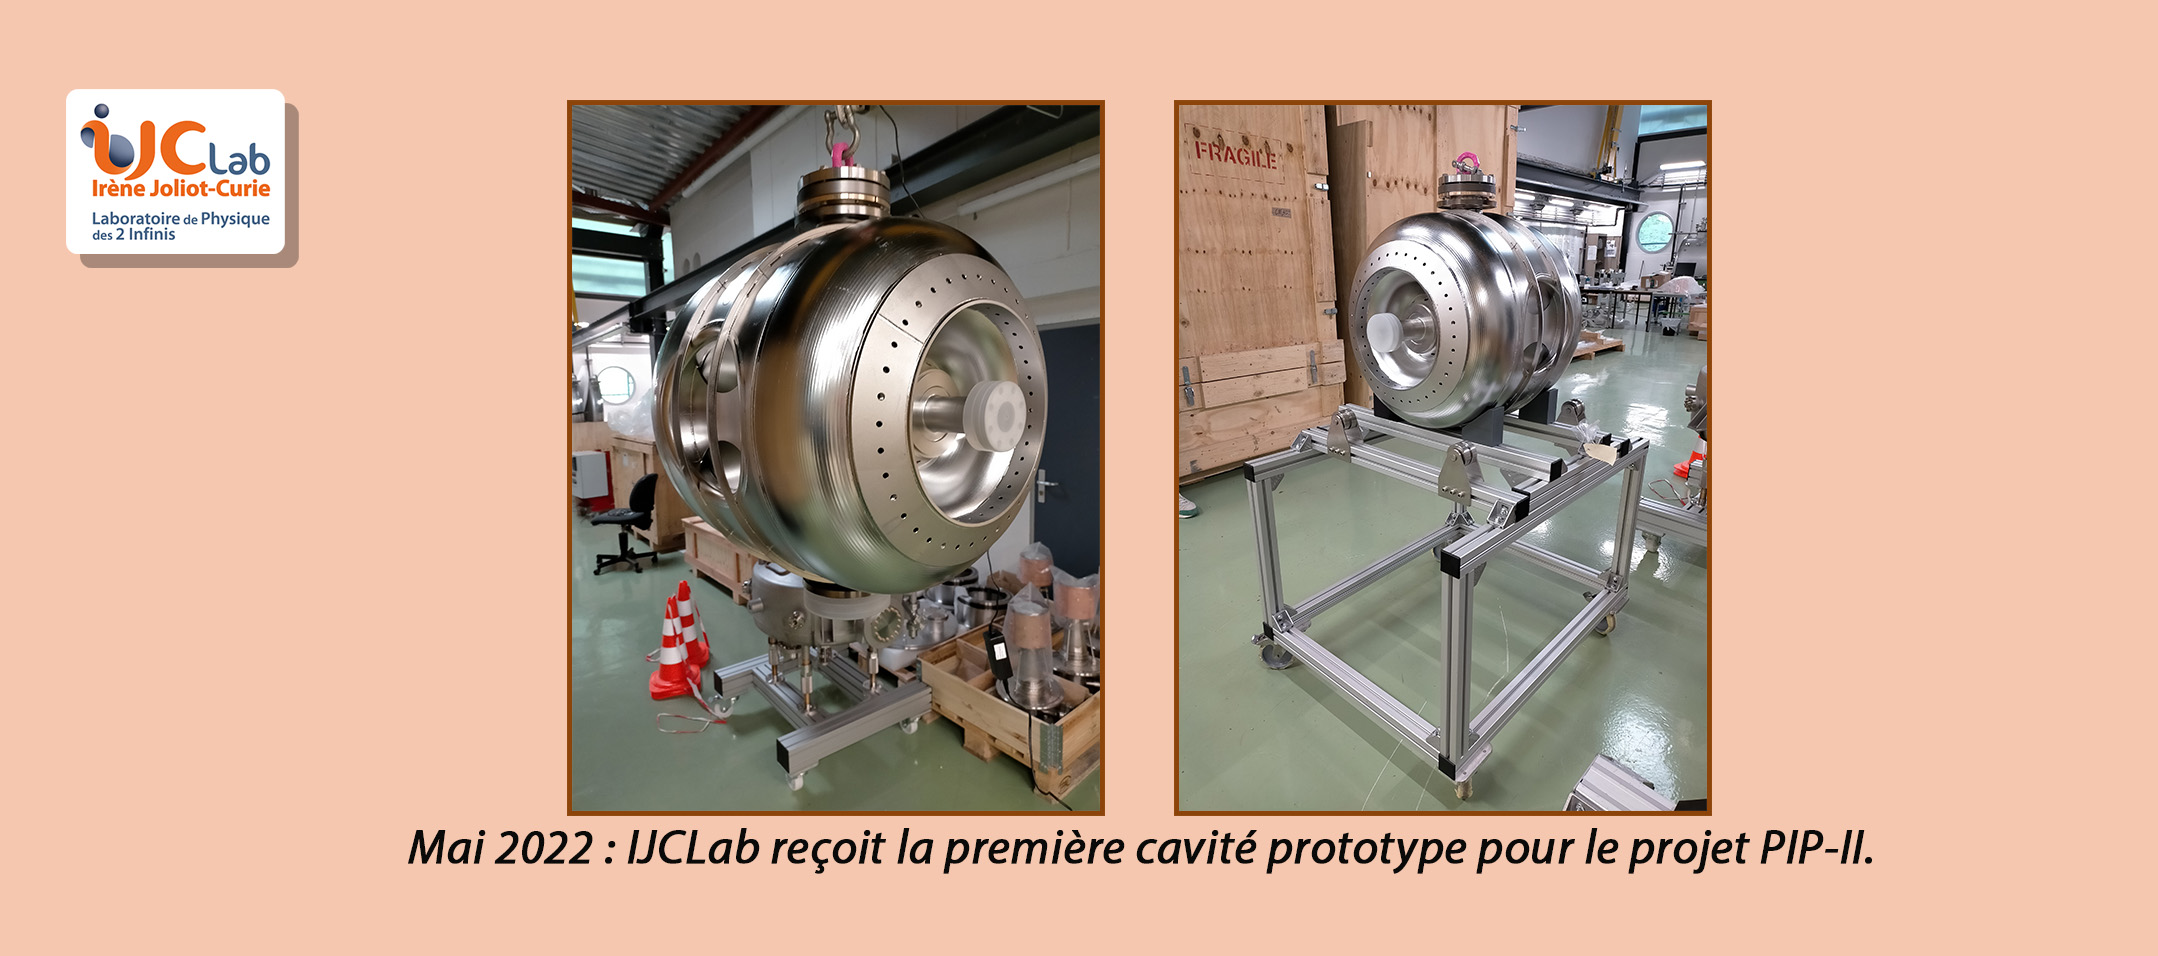 IJCLab receives the first prototype cavity for the PIP-II project